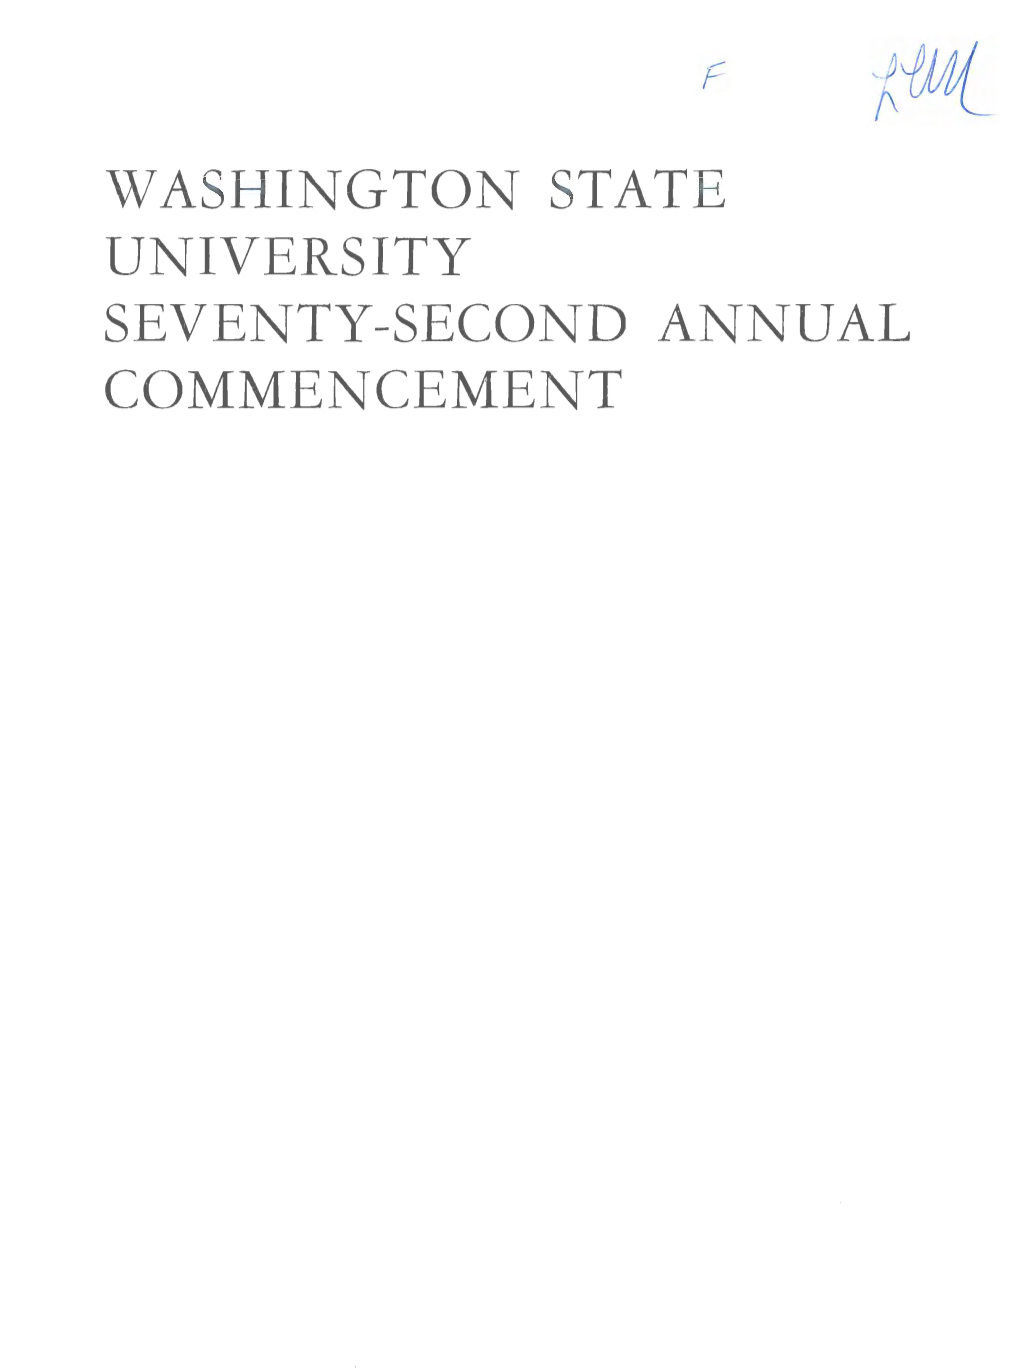 Washington State University Seventy-Second Annual Commencement